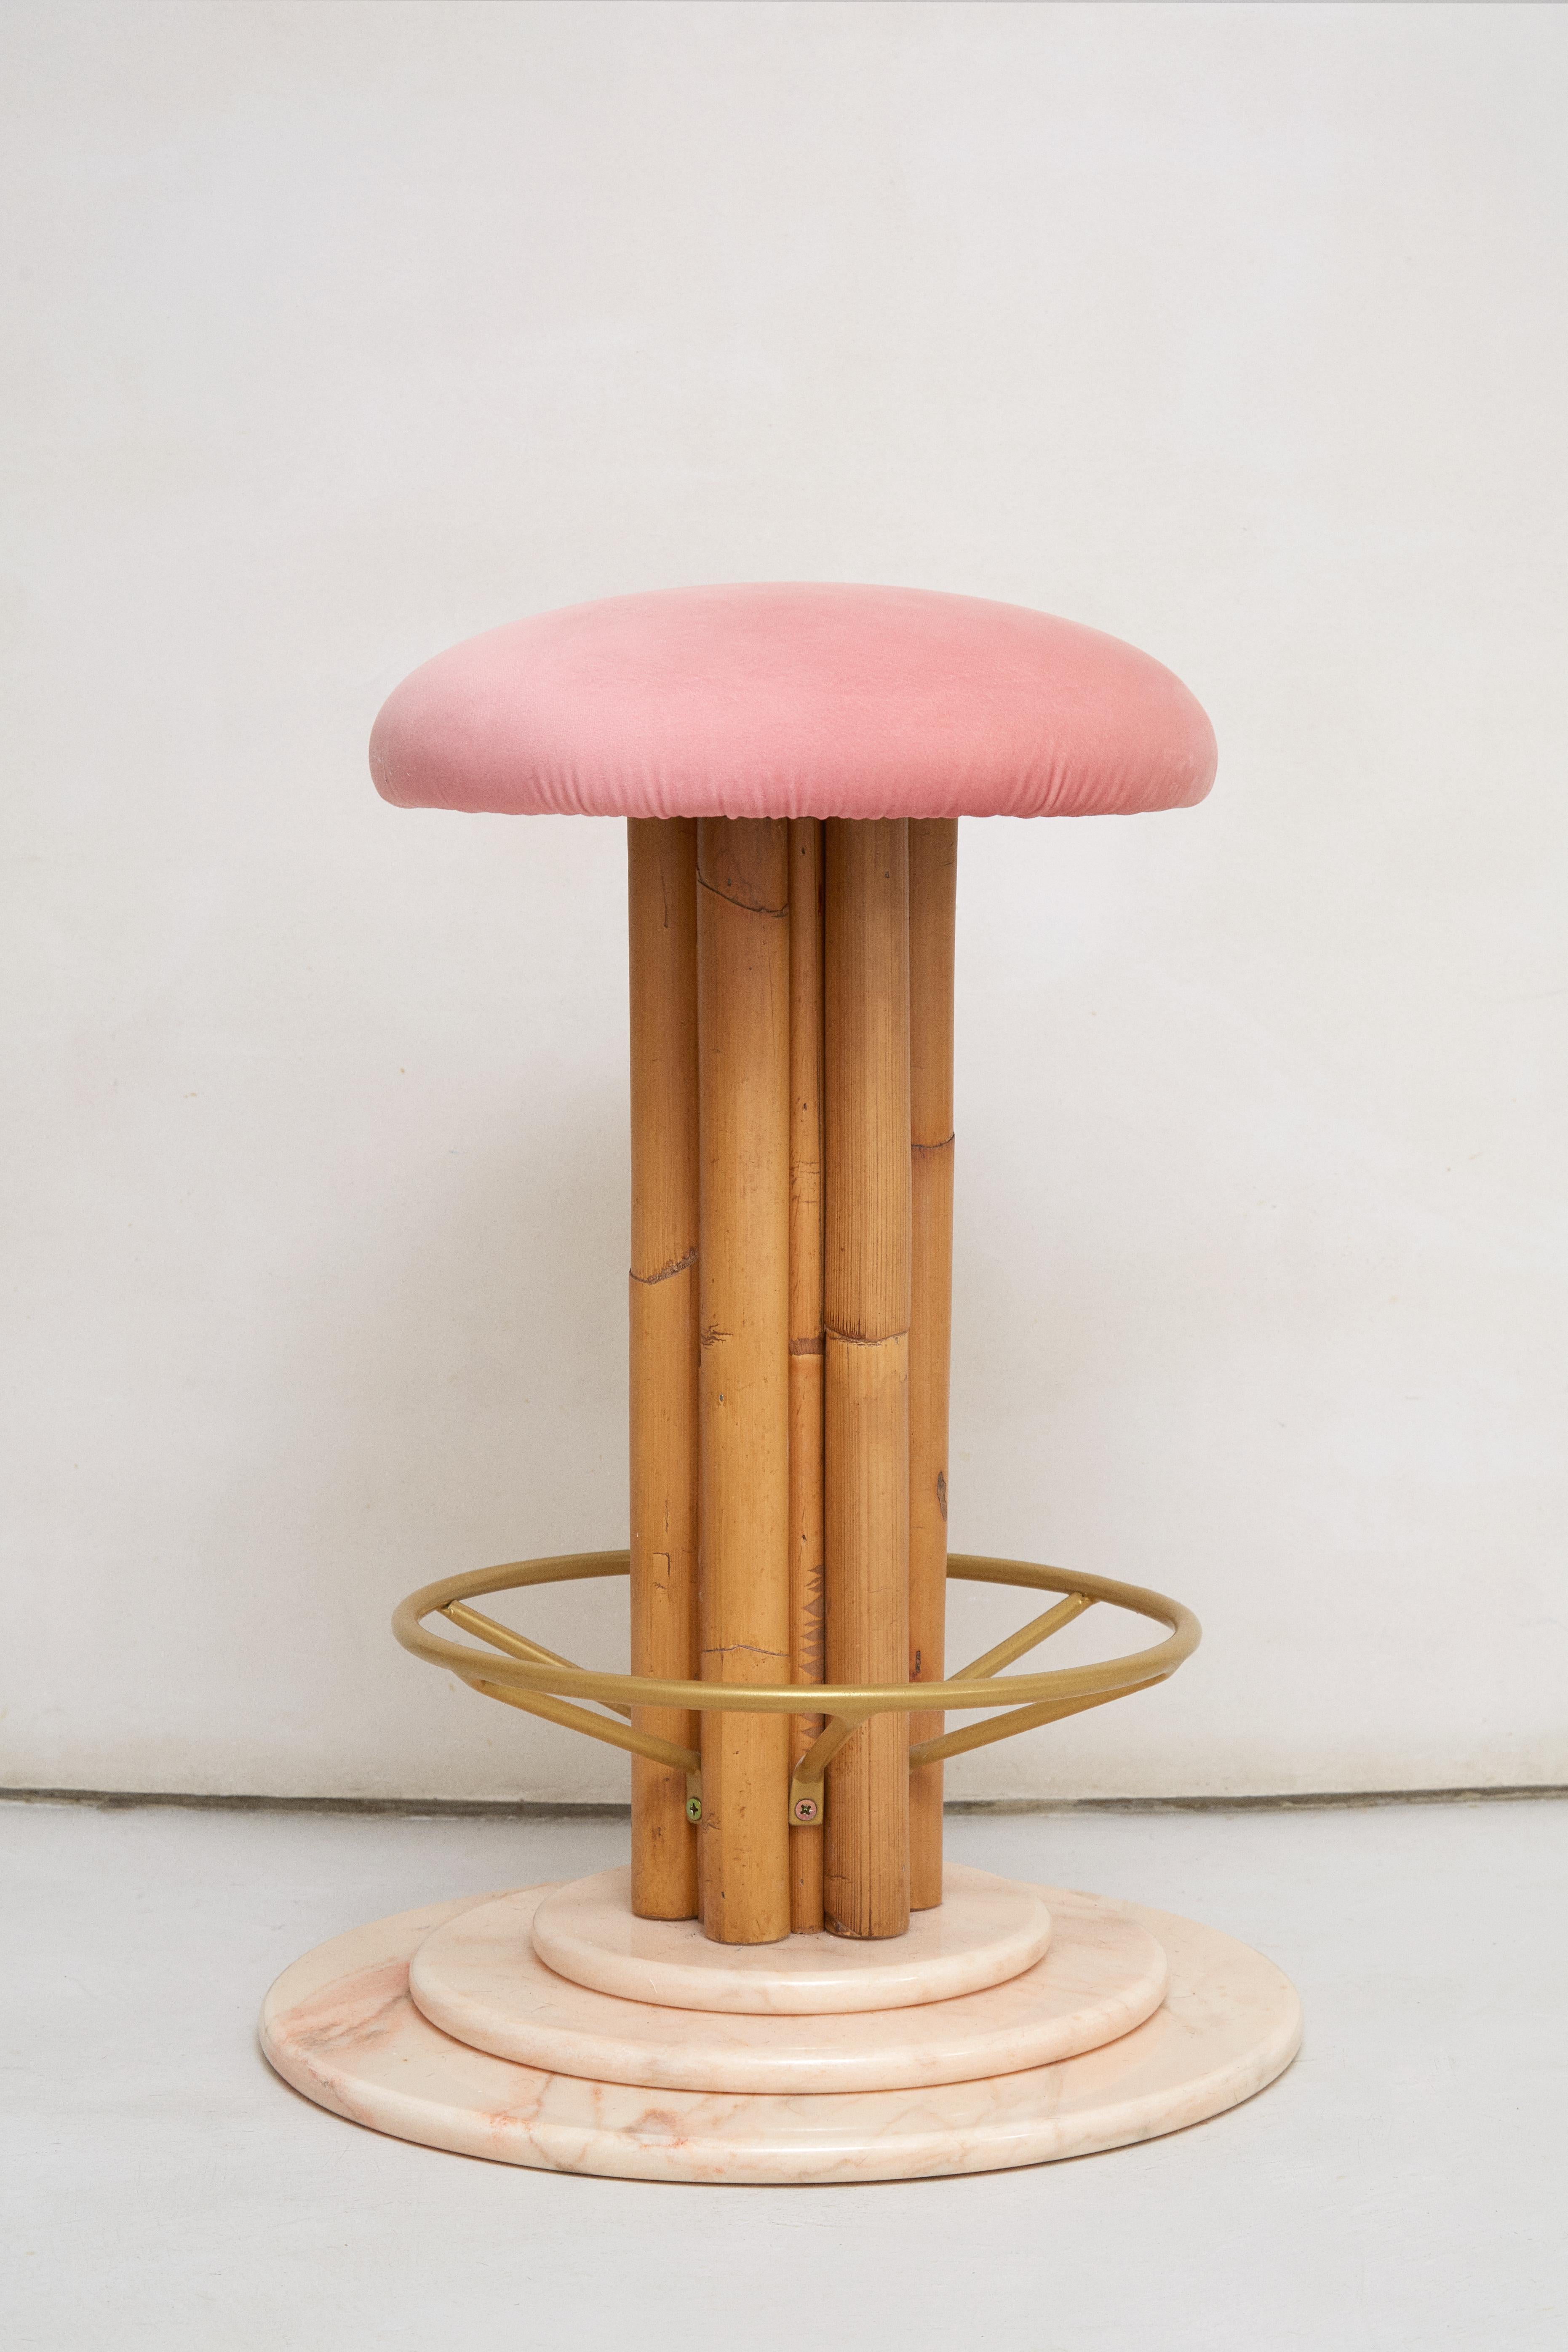 Peaches Stool by Patricia Bustos de la Torre
Dimensions: D 38 x W 38 x H 84 cm.
Materials: Rattan, pink Portuguese marble, velvet and iron. 

Taburete Peachy is sexy and sensual but round and surprising. A bomb of color and textures that will impact